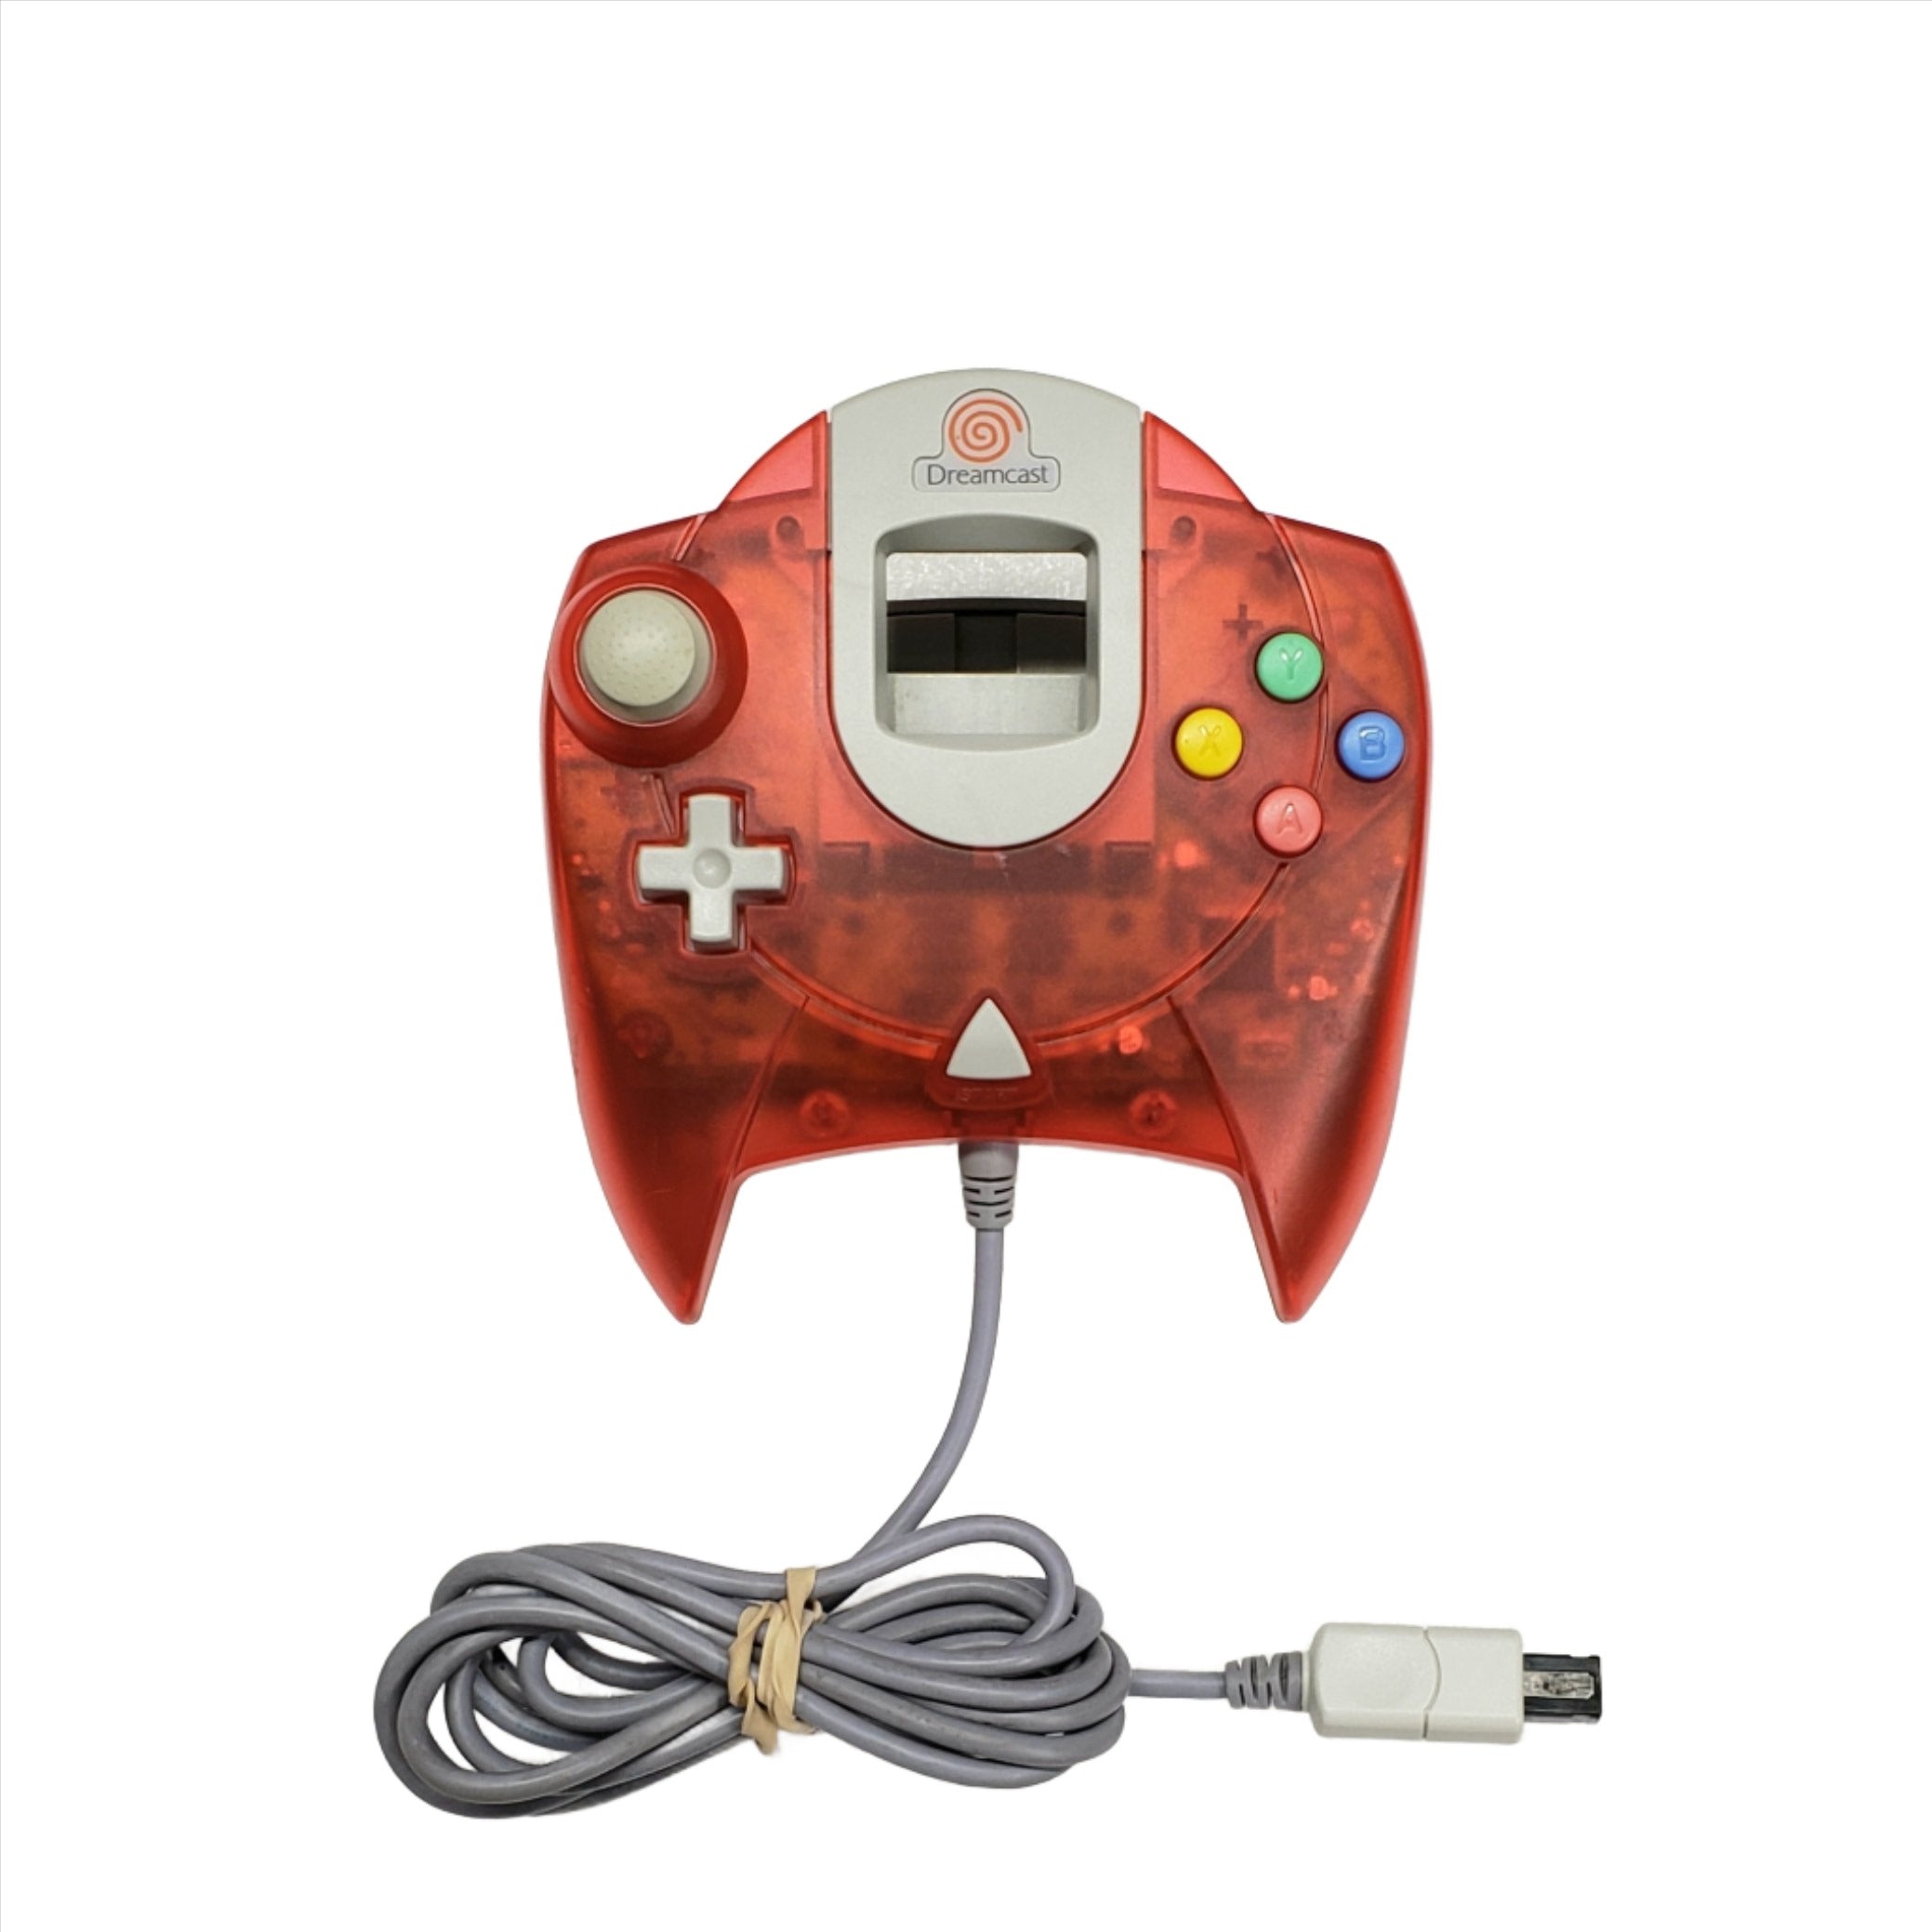 Sega Dreamcast Controller - Transparent Red - YourGamingShop.com - Buy, Sell, Trade Video Games Online. 120 Day Warranty. Satisfaction Guaranteed.